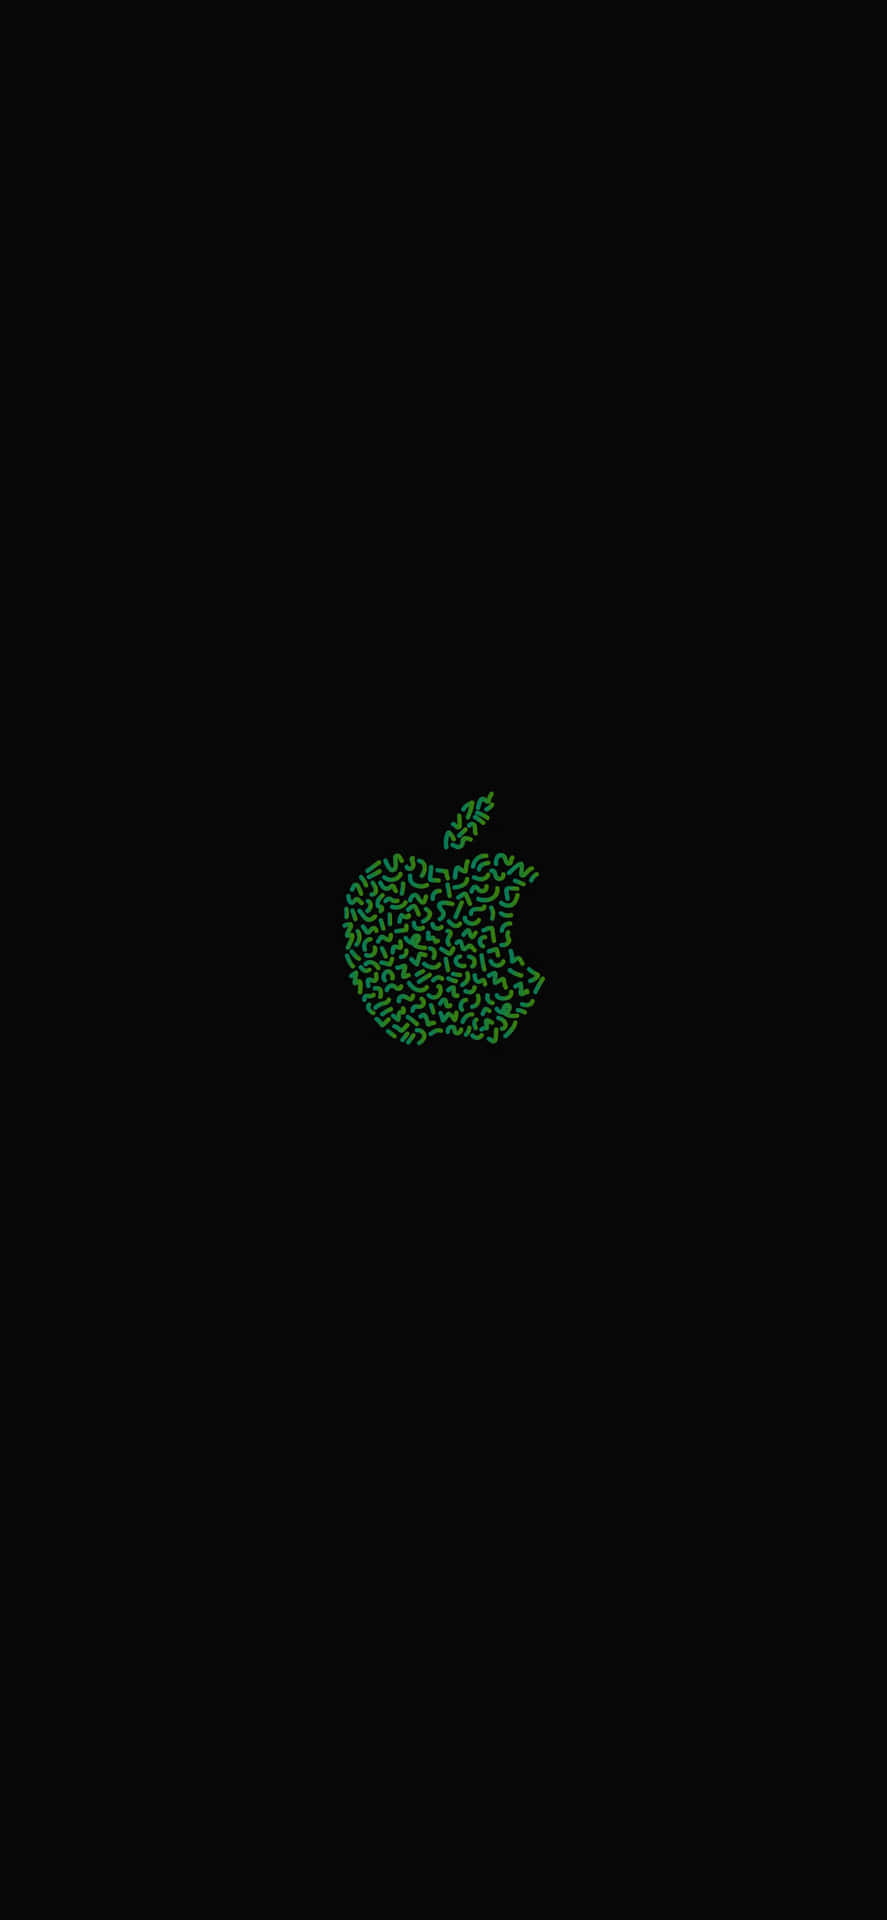 Check out the latest Olive Green Apple iPhone Wallpaper